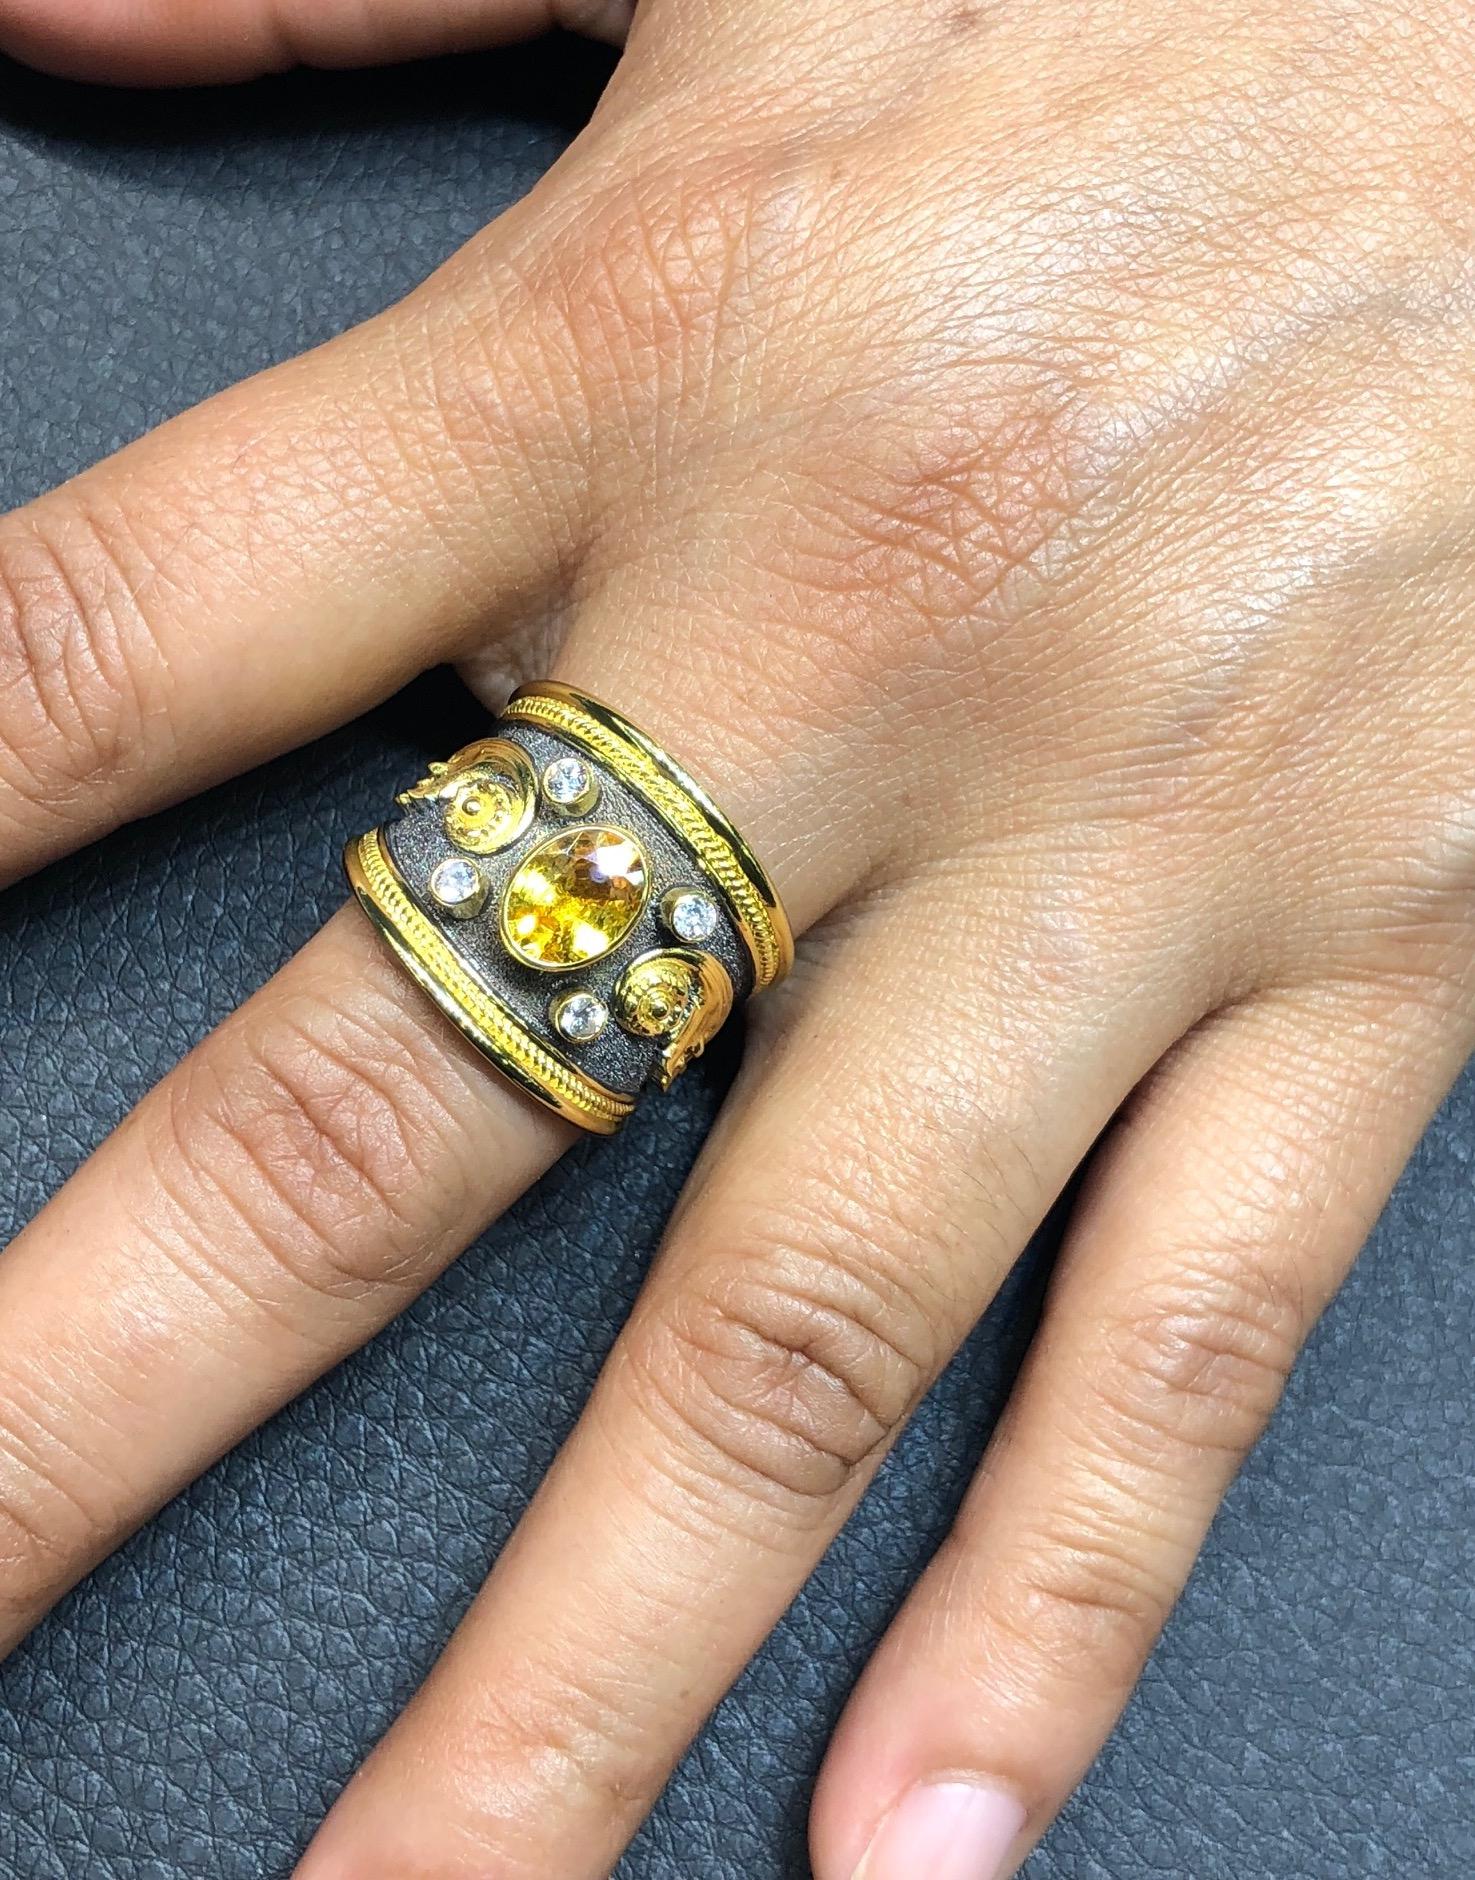 S.Georgios design ring handmade from solid 18 Karat Yellow Gold. The ring is microscopically decorated with gold wires - granulated details contrast with a unique Byzantine velvet background finished with Black Rhodium. The Ring features 4 Brilliant